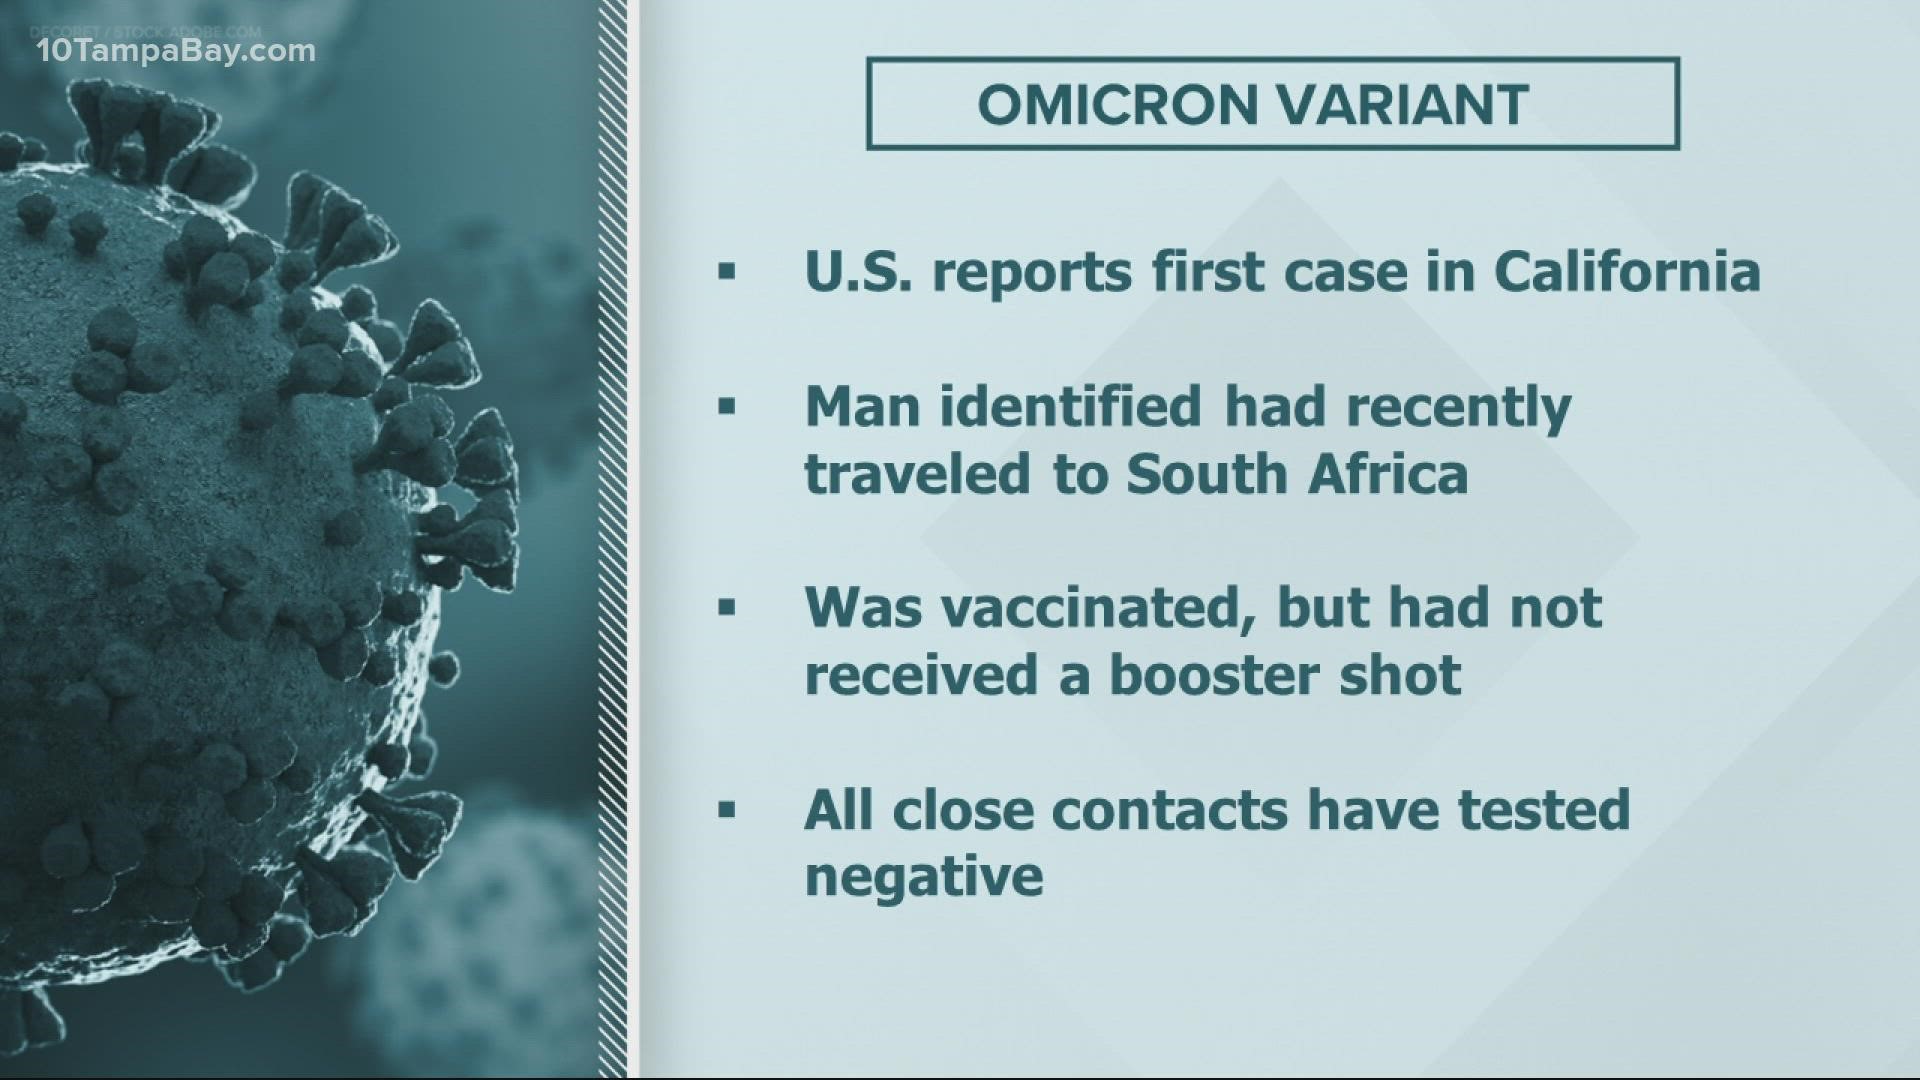 Authorities said the first U.S. case of the omicron variant was discovered in California.